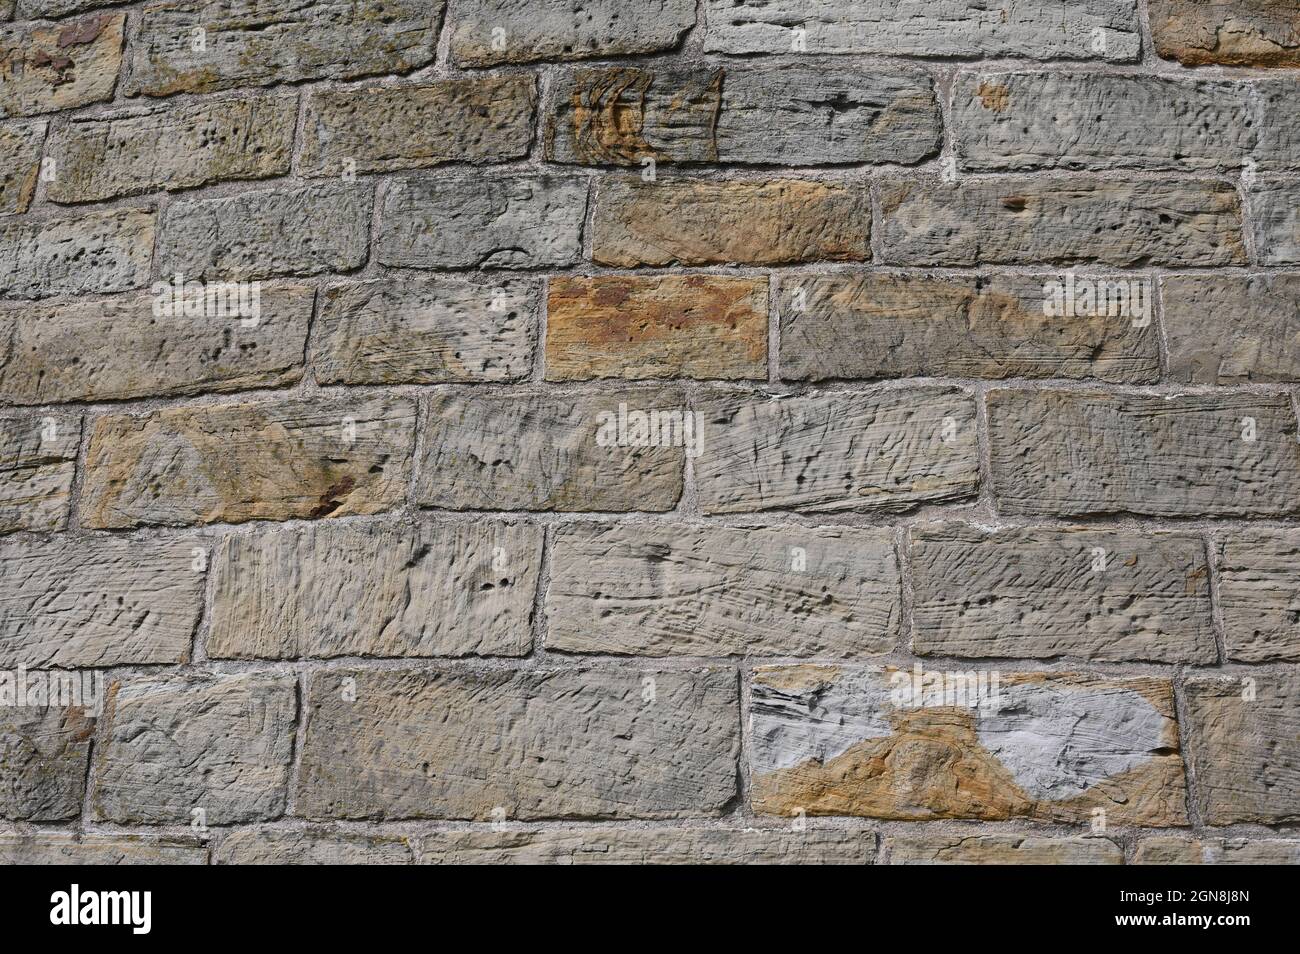 Rustic wall made of sandstone blocks Stock Photo